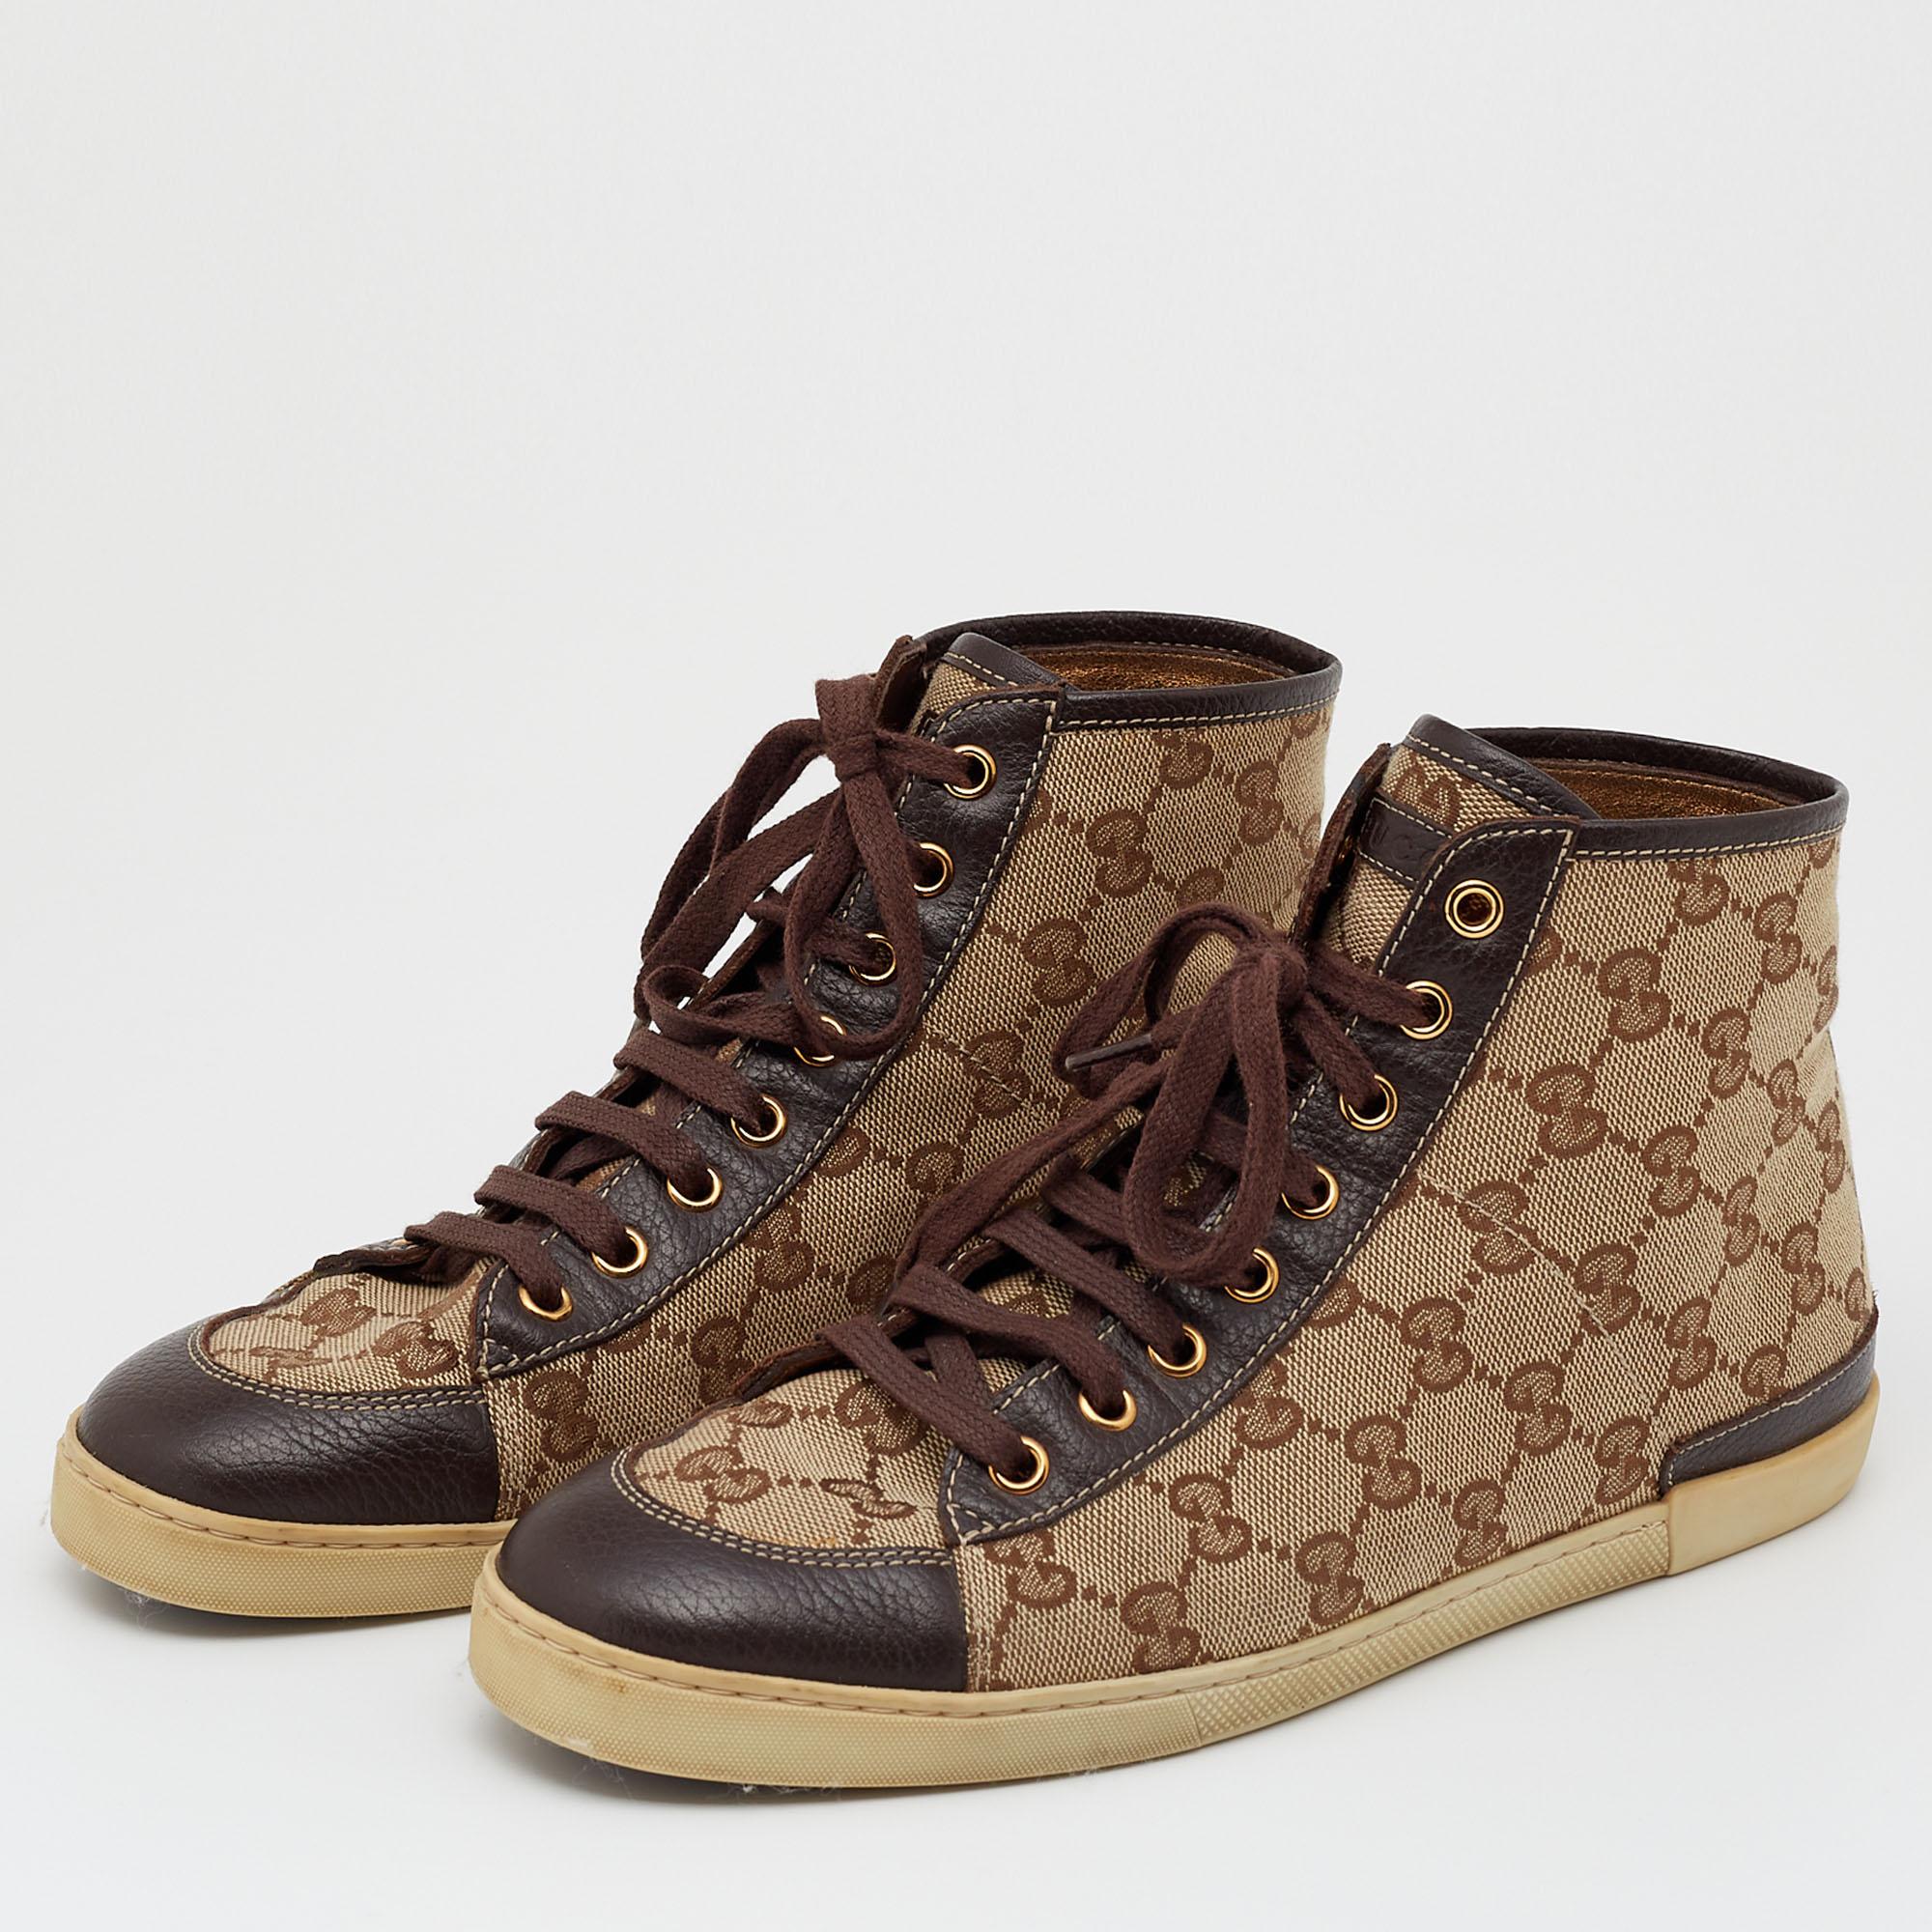 Cloak your feet with these luxuriously designed Gucci sneakers. Created from leather and GG Supreme canvas, they display lace-up vamps, rubber soles, and gold-tone hardware. This beige high-top pair will complement a variety of outfits in your